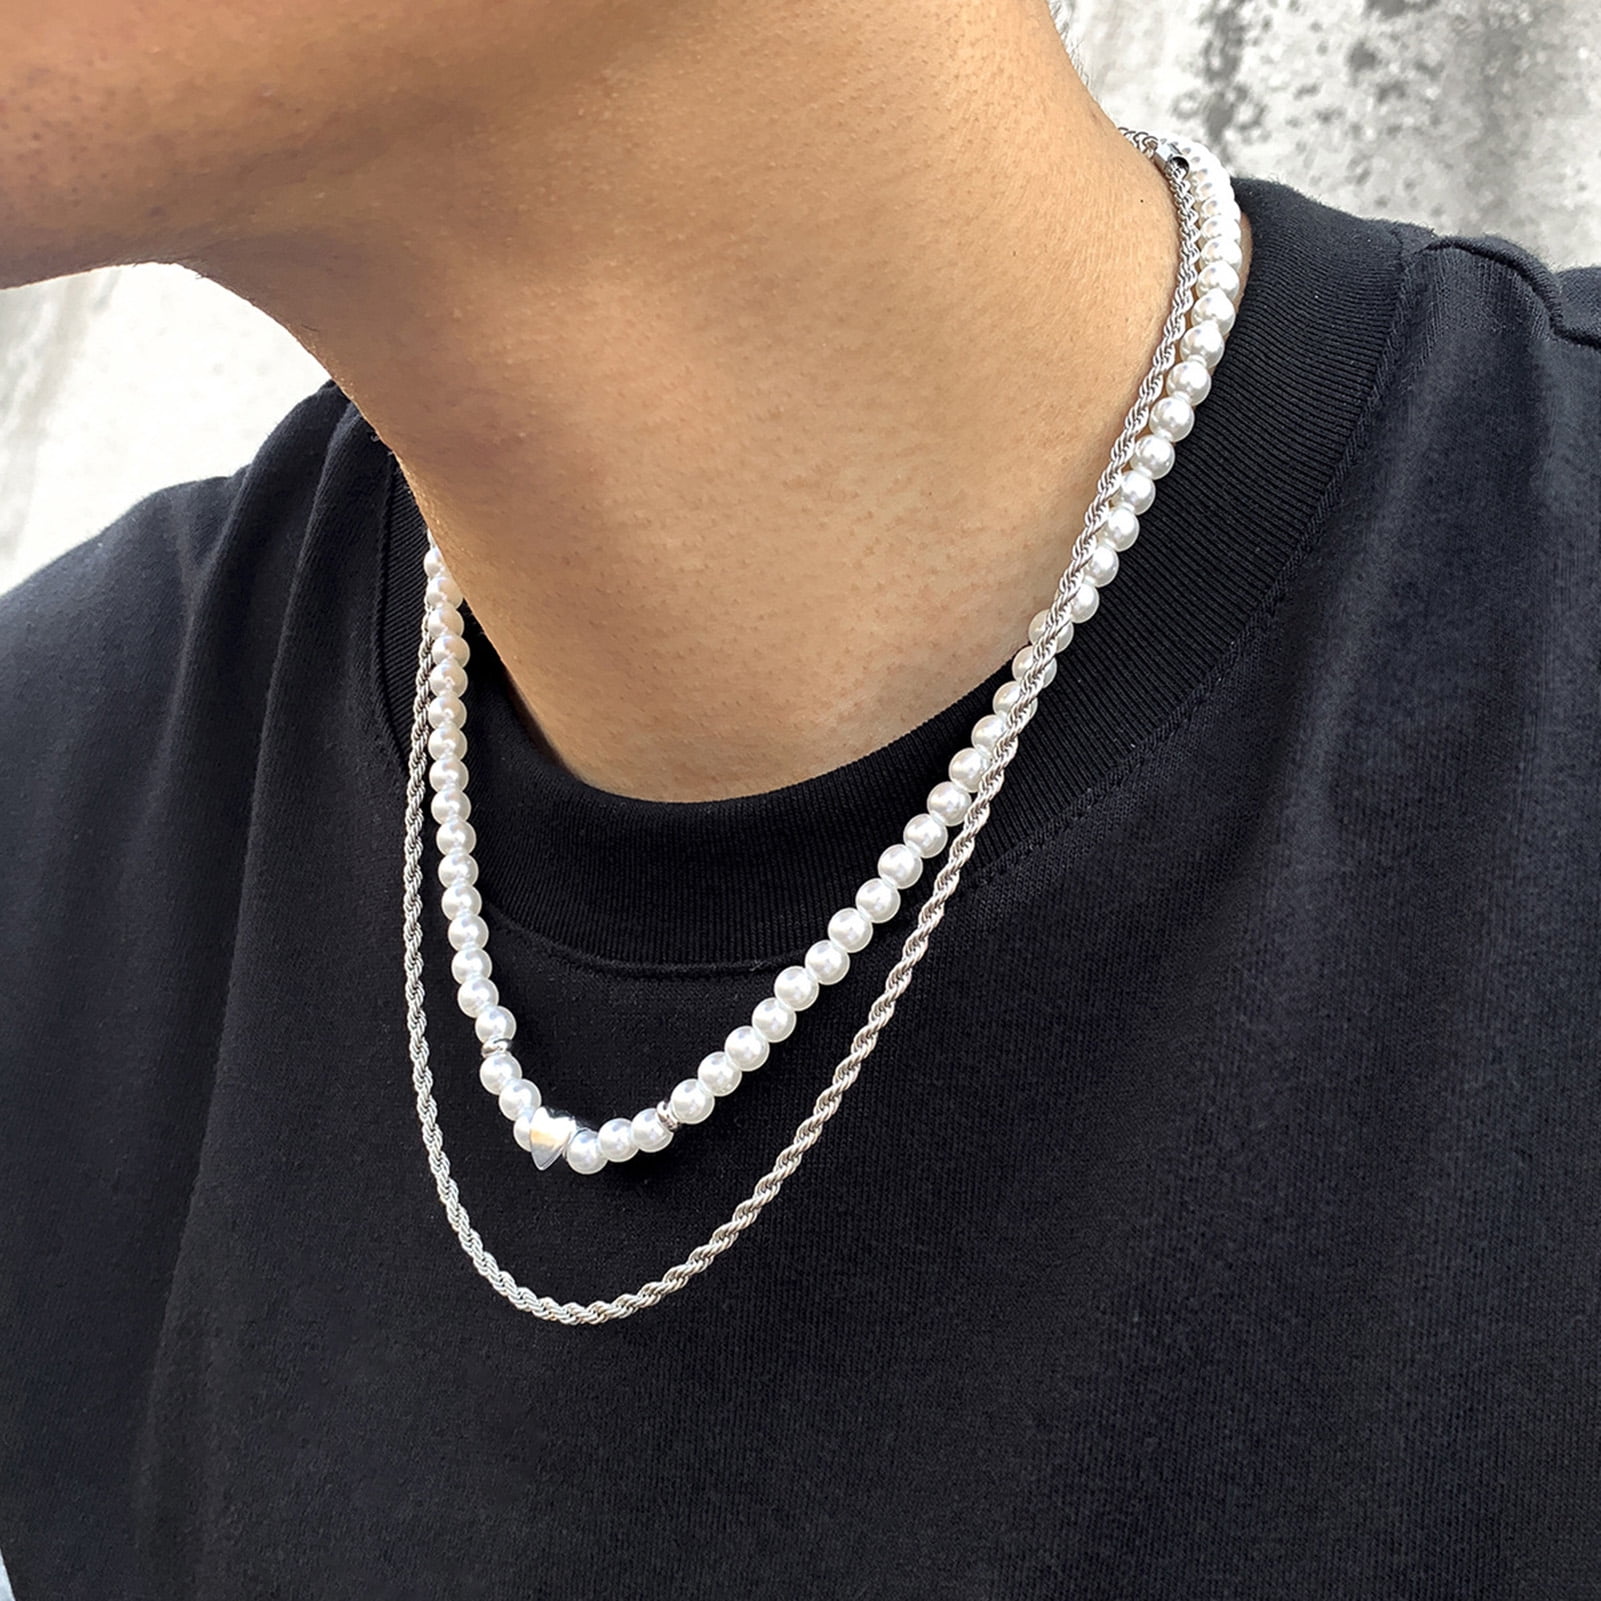 Fashionable and Popular Men Chain Necklace Alloy for Jewelry Gift and for a  Stylish Look